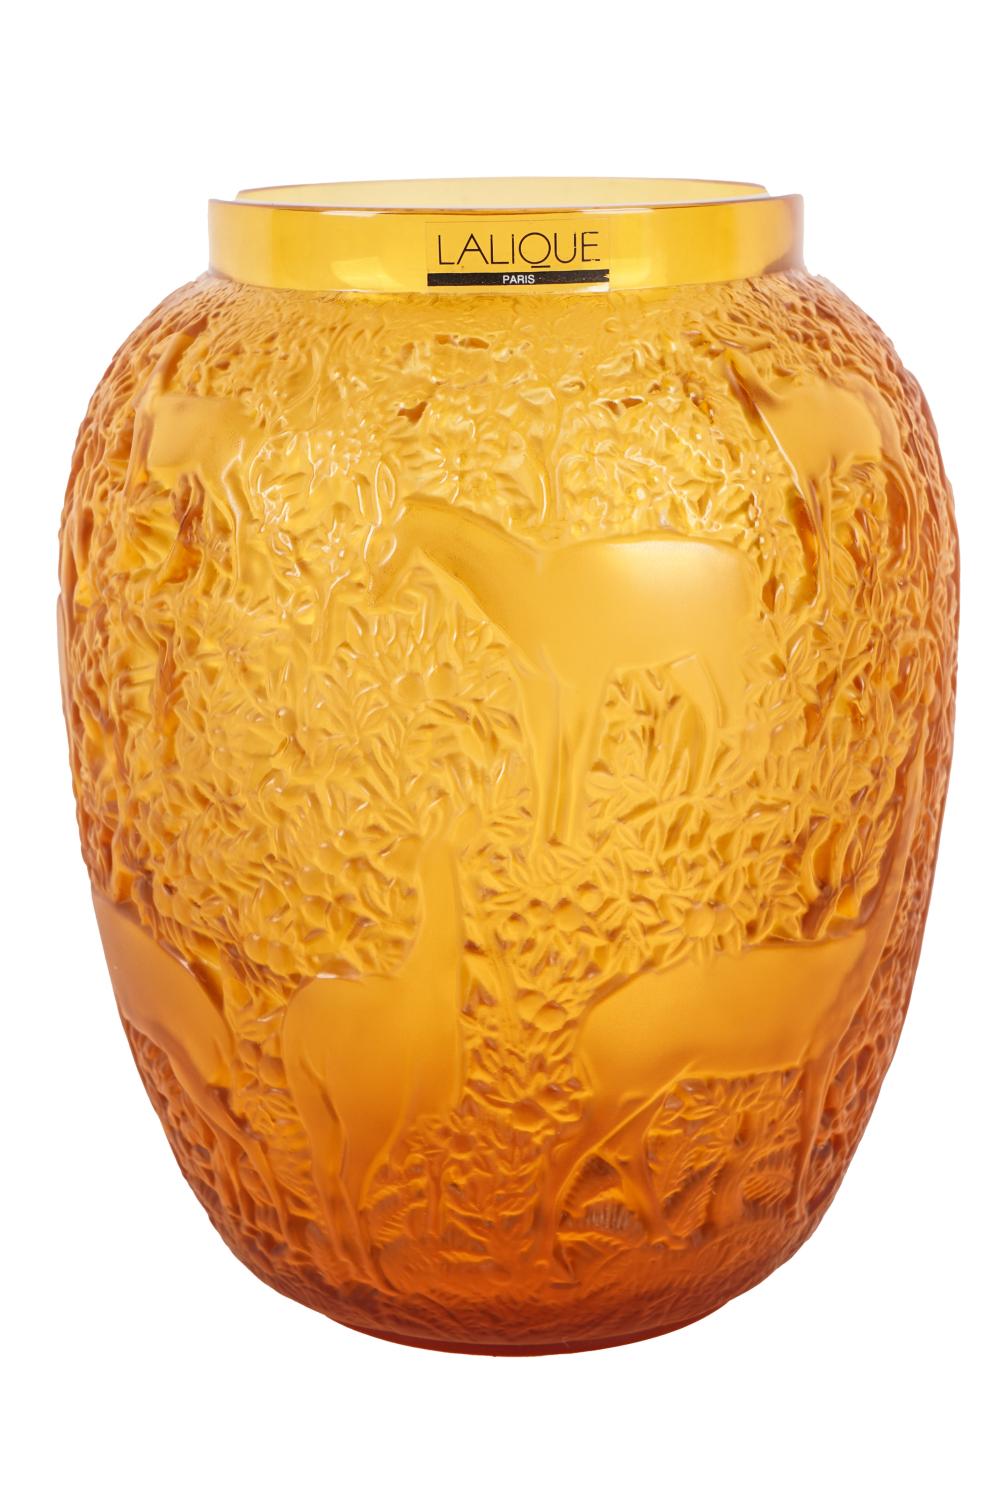 LALIQUE AMBER GLASS BICHES VASEsigned 332975